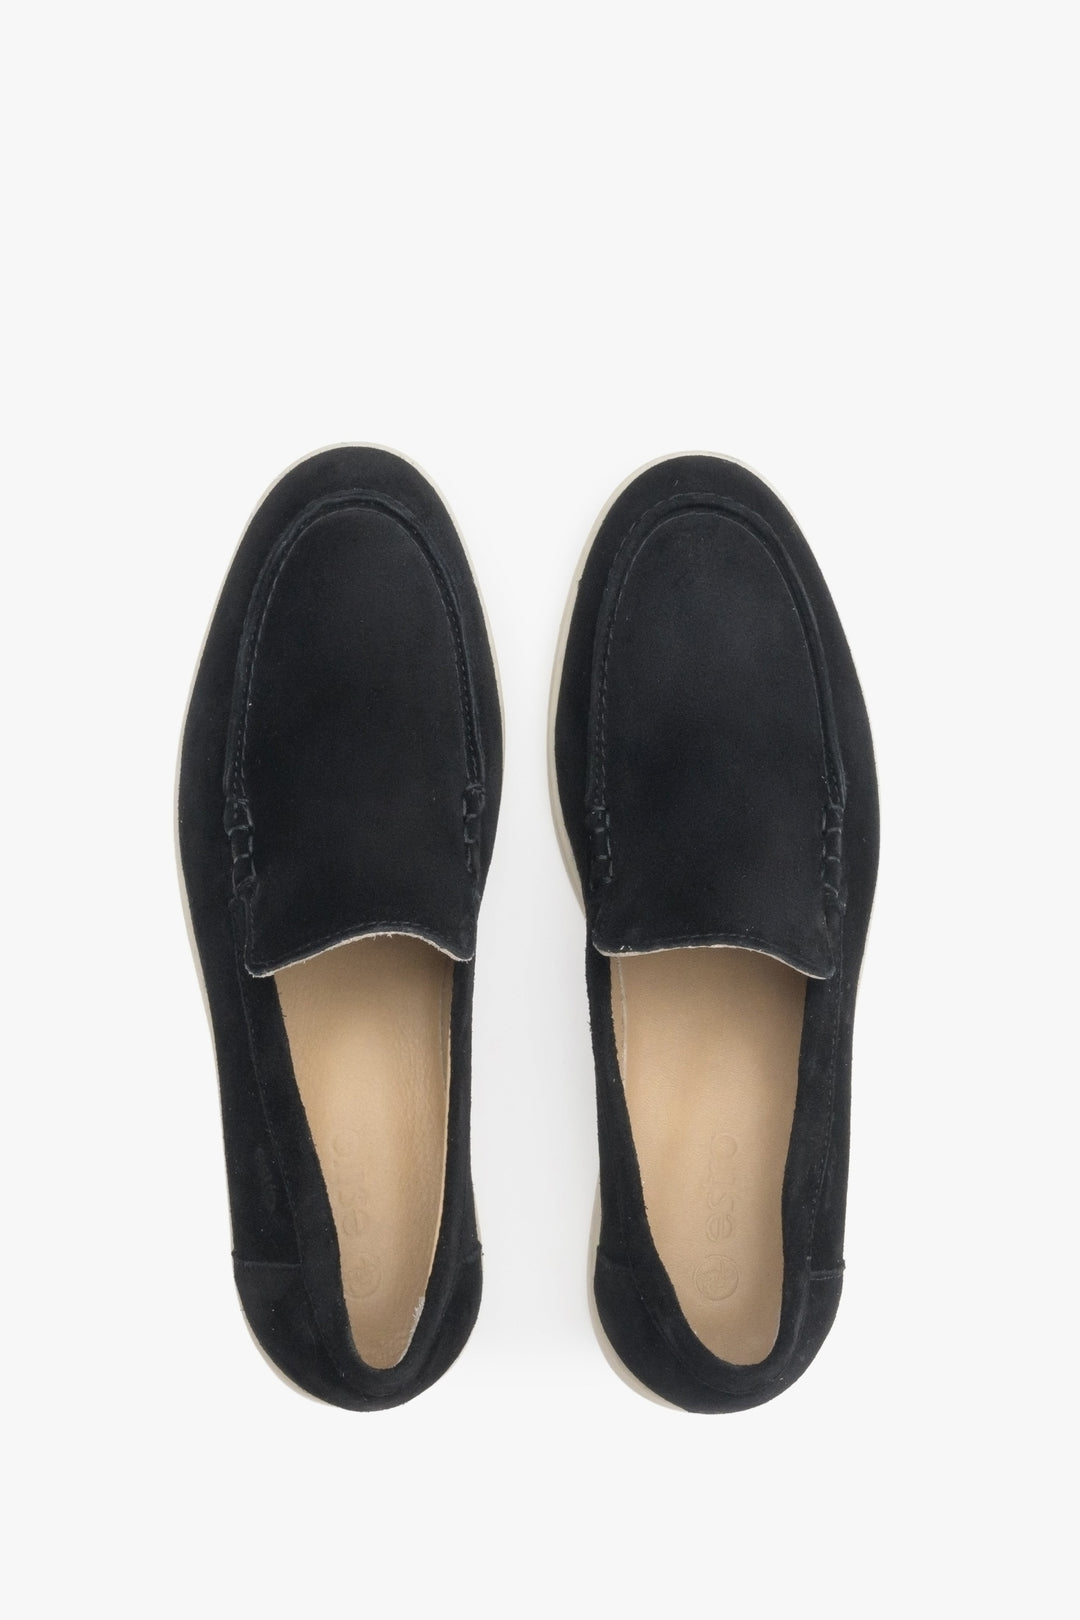 Feminine black velour loafers - presentation of the footwear from above.